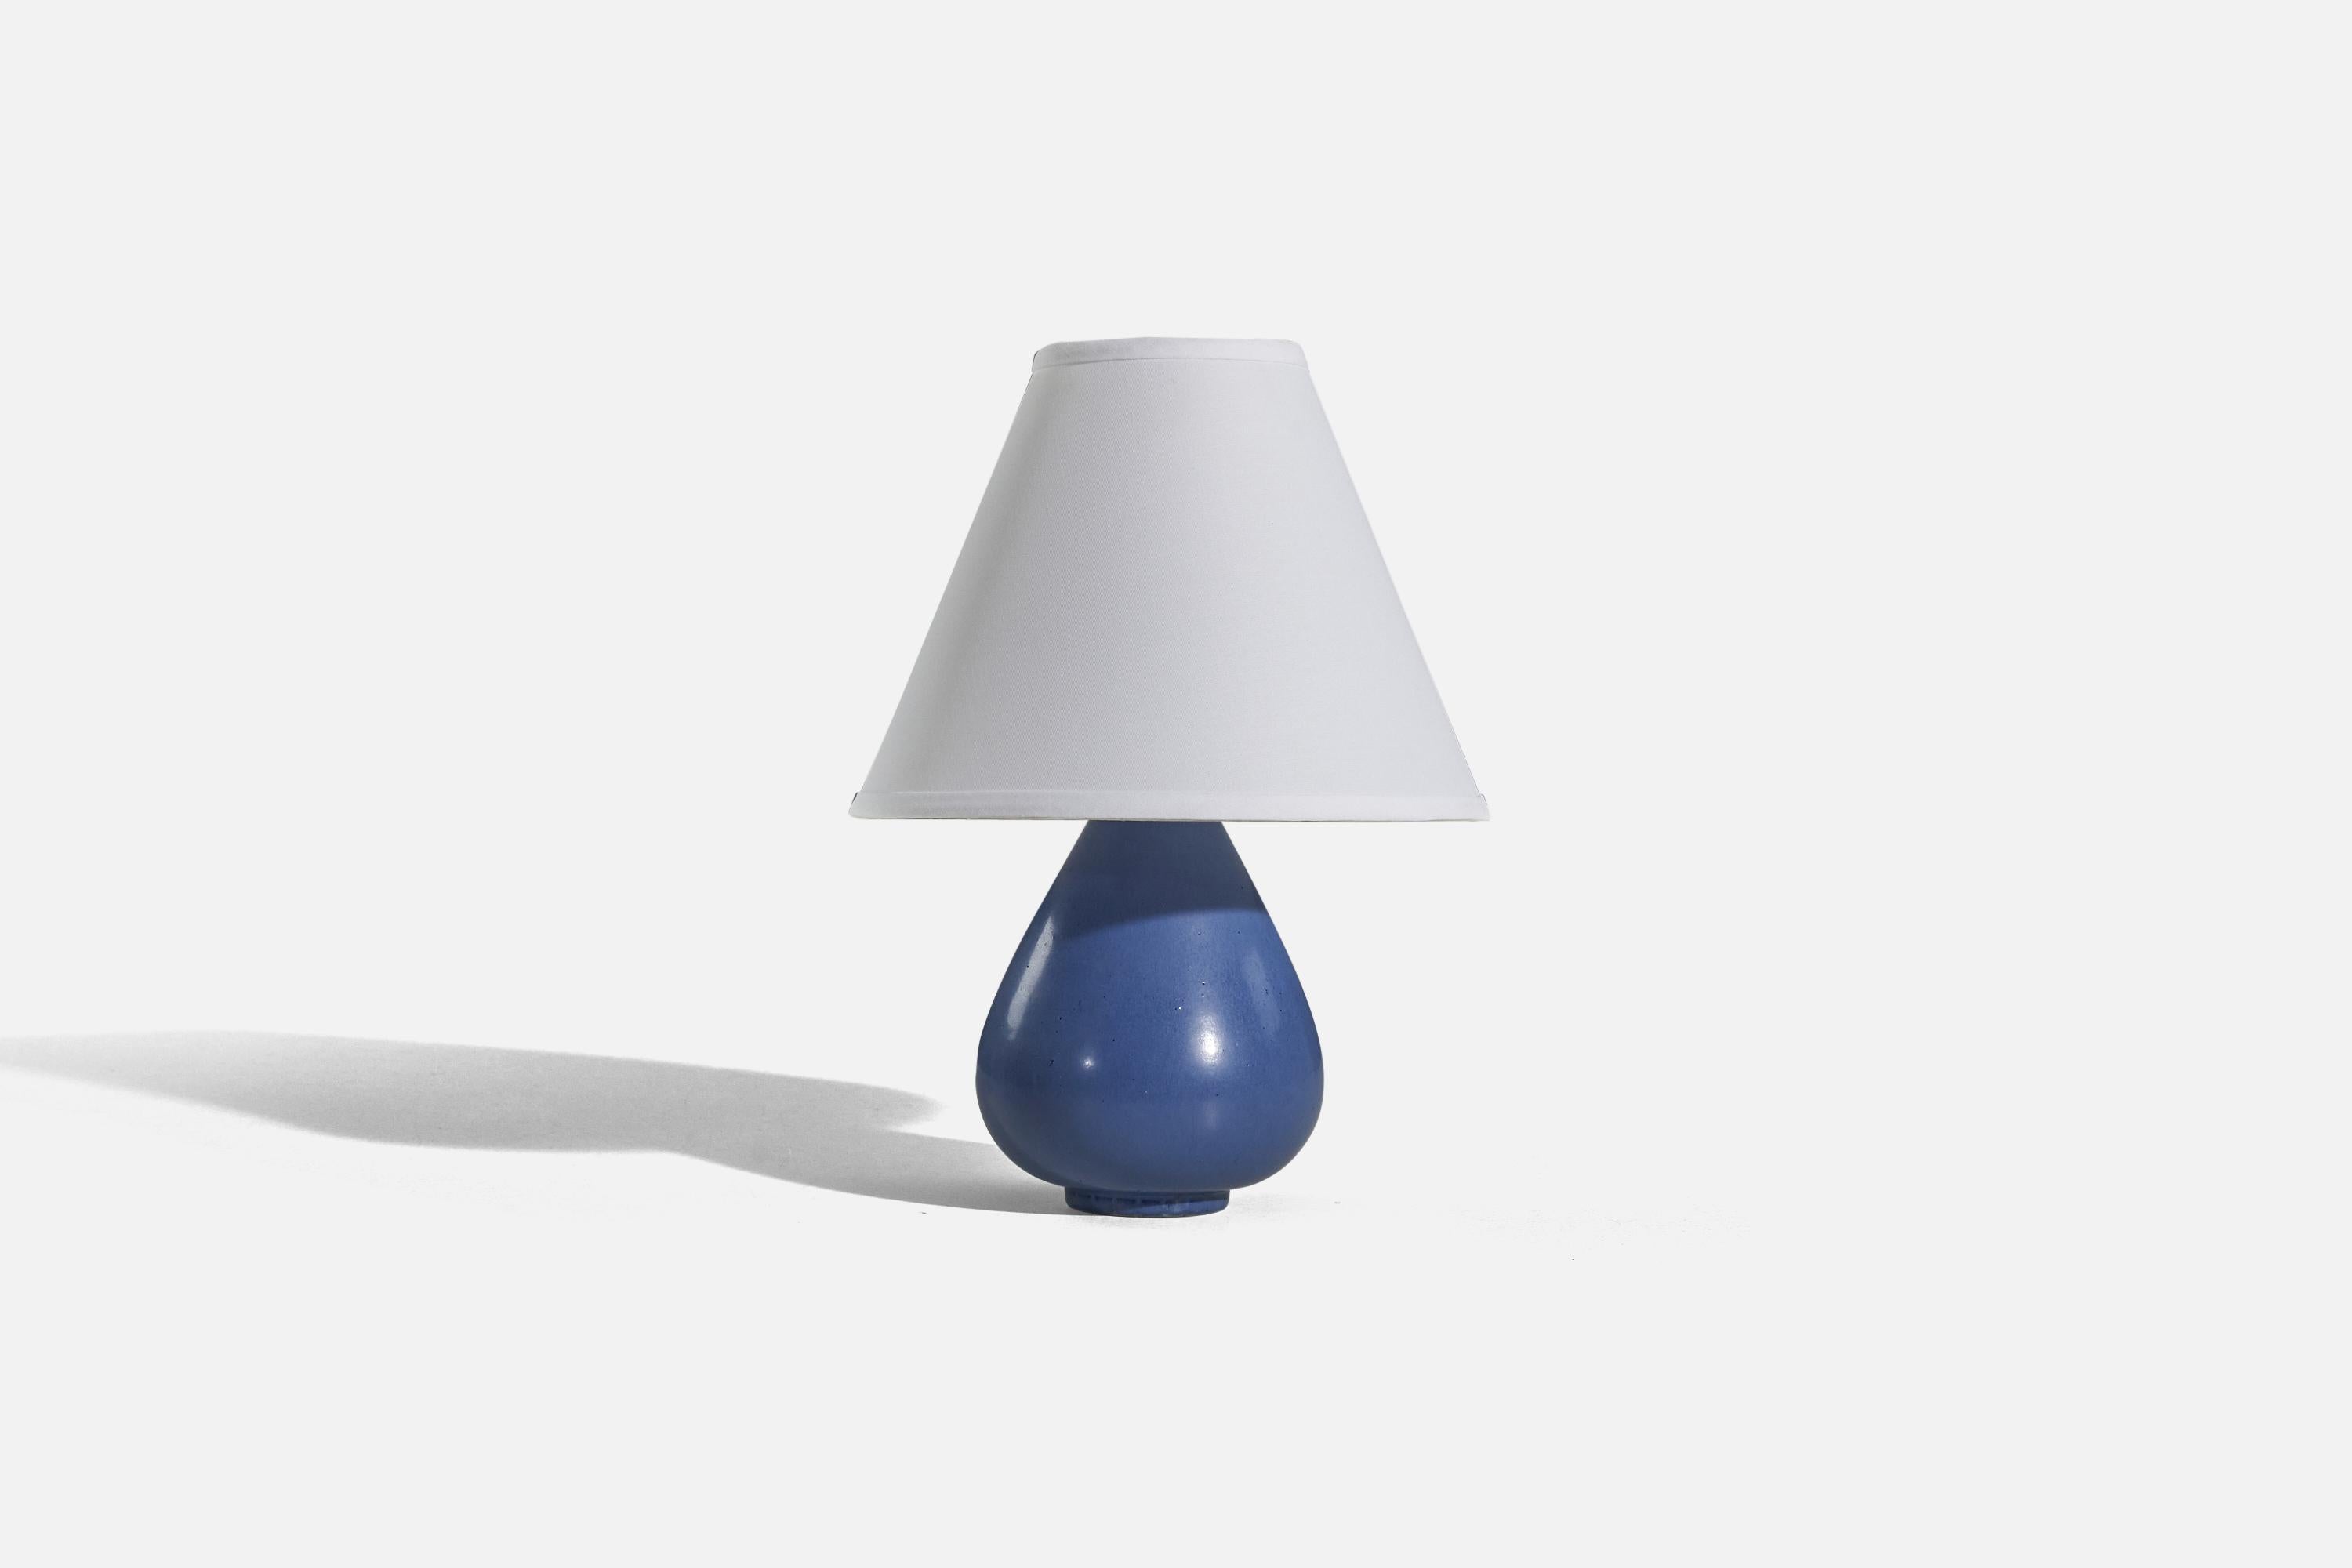 A blue, glazed stoneware table lamp designed by Gunnar Nylund and produced by Rörstrand, Sweden, 1950s. 

Sold without lampshade. 
Dimensions of lamp (inches) : 9.5 x 5.5 x 5.5 (H x W x D)
Dimensions of shade (inches) : 4.25 x 10.25 x 8 (T x B x